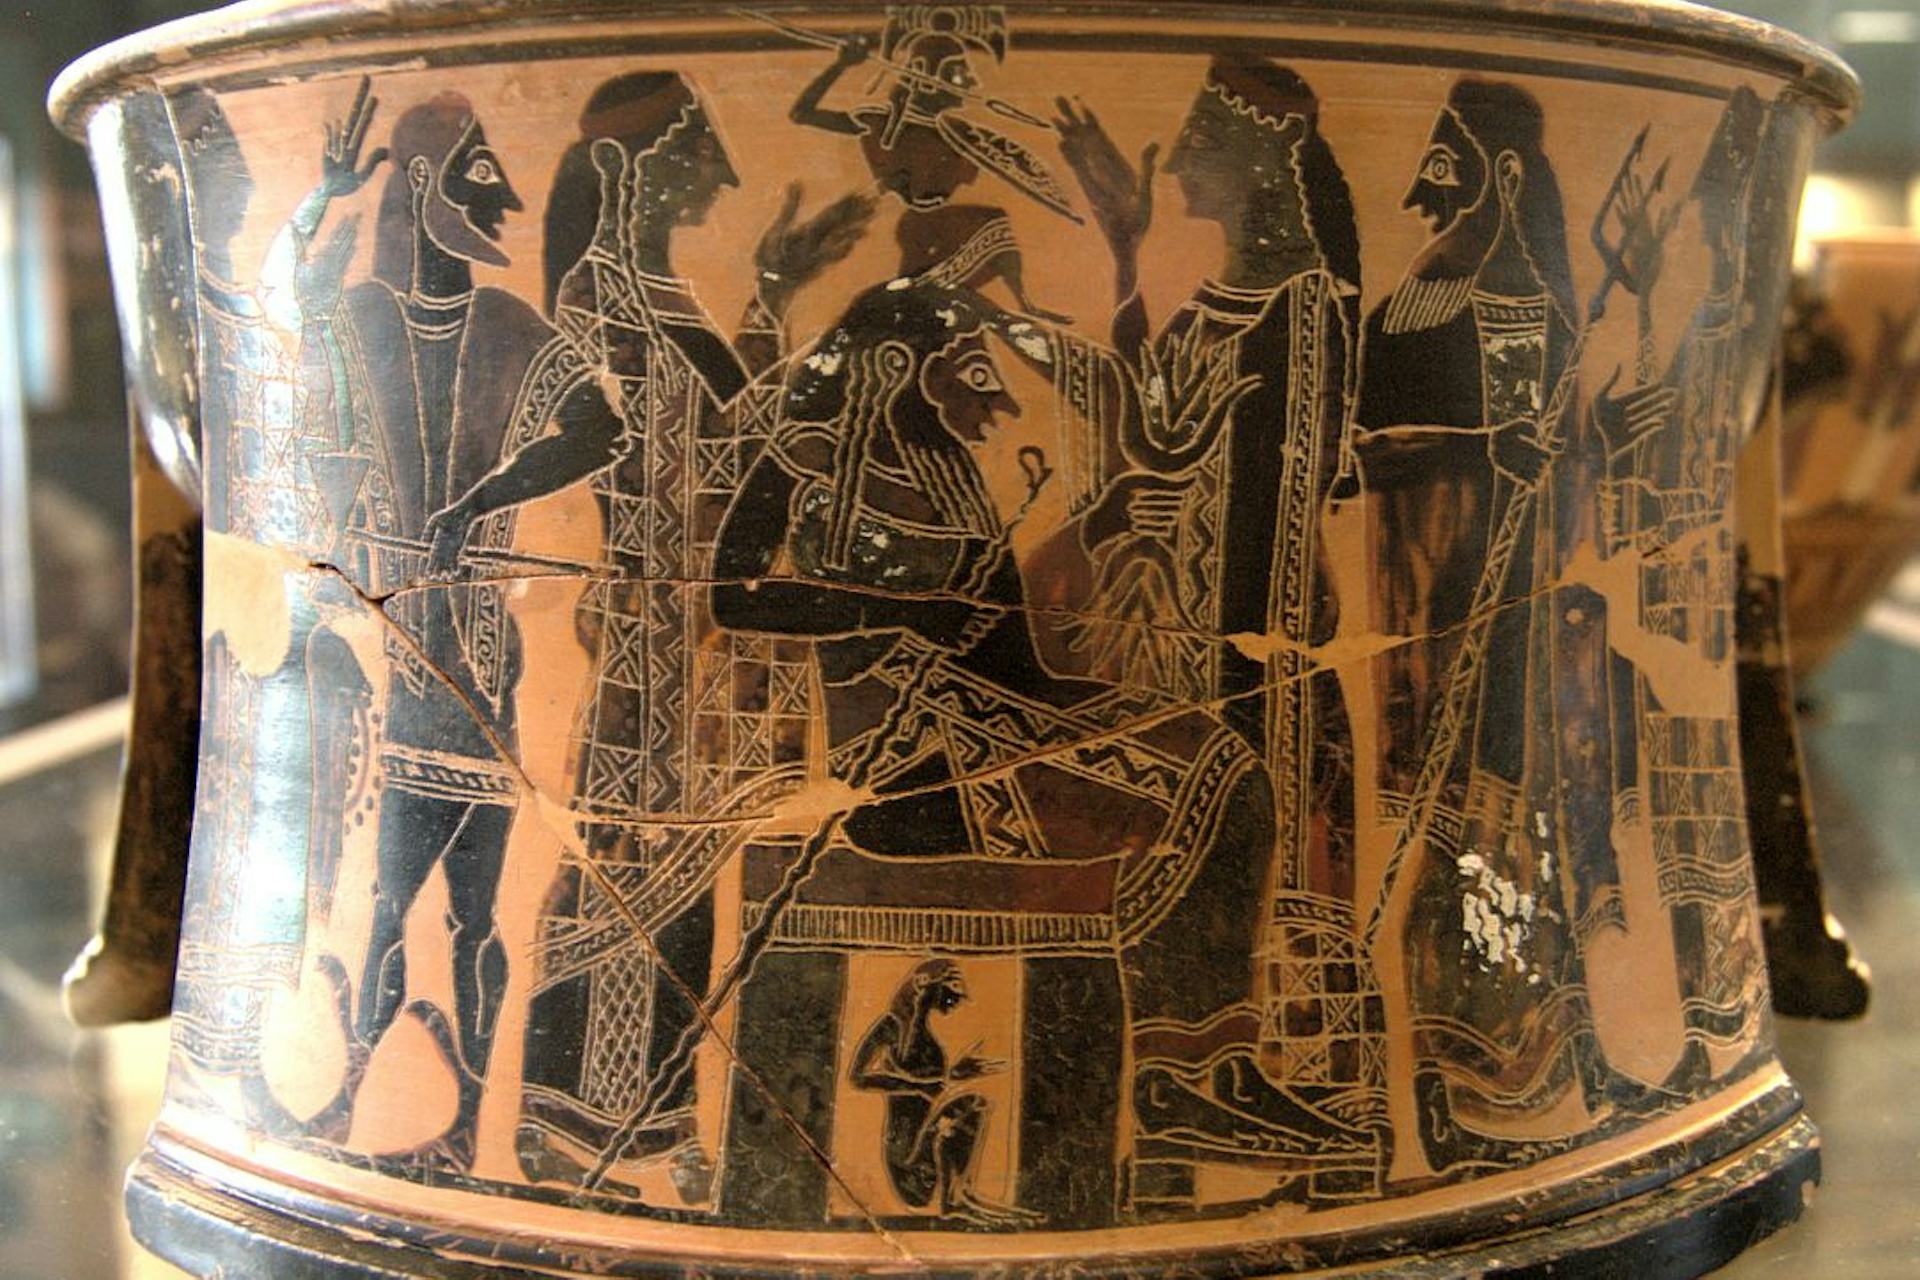 Vase painting of the birth of Athena